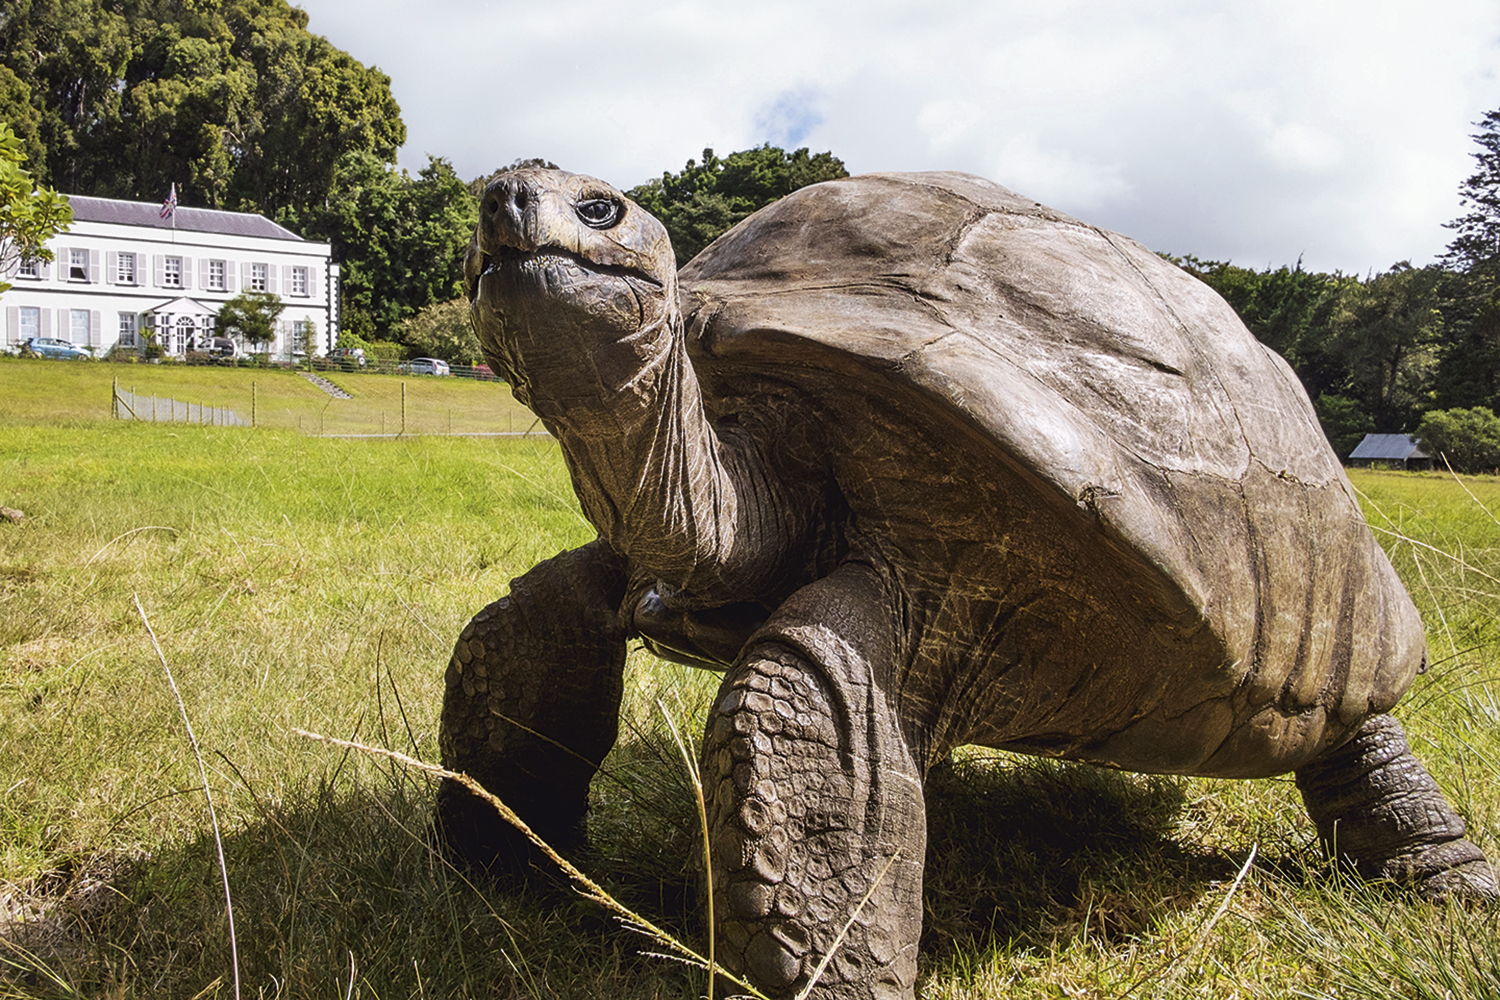 Young lady - Jonathan Tortoise: 190 years old, but she should live longer -